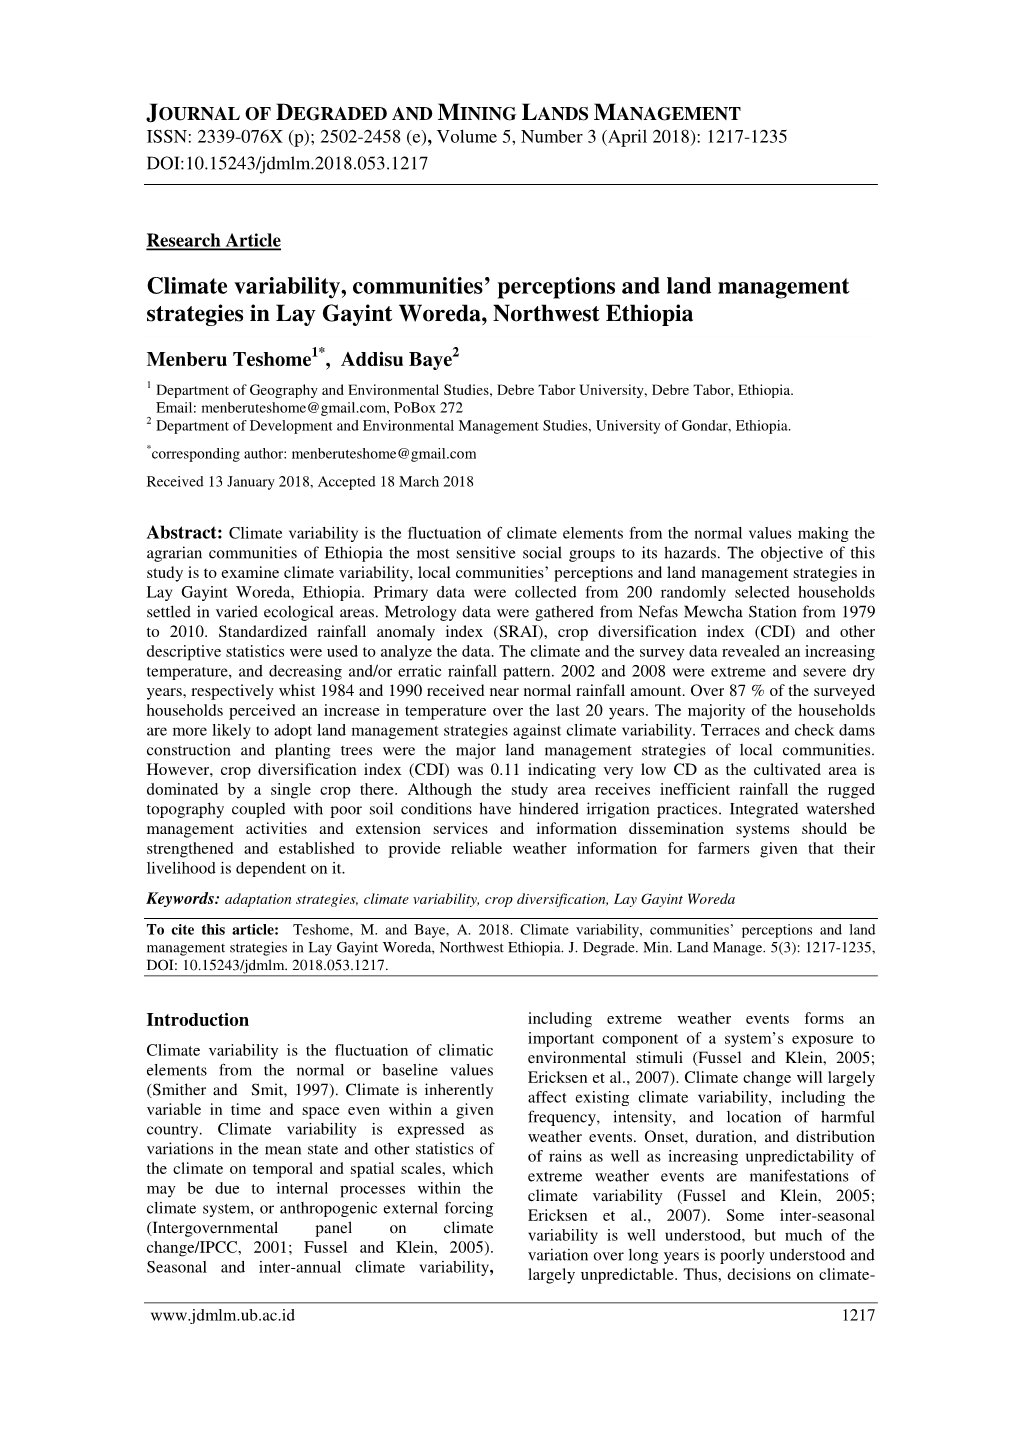 Climate Variability, Communities' Perceptions and Land Management Strategies in Lay Gayint Woreda, Northwest Ethiopia